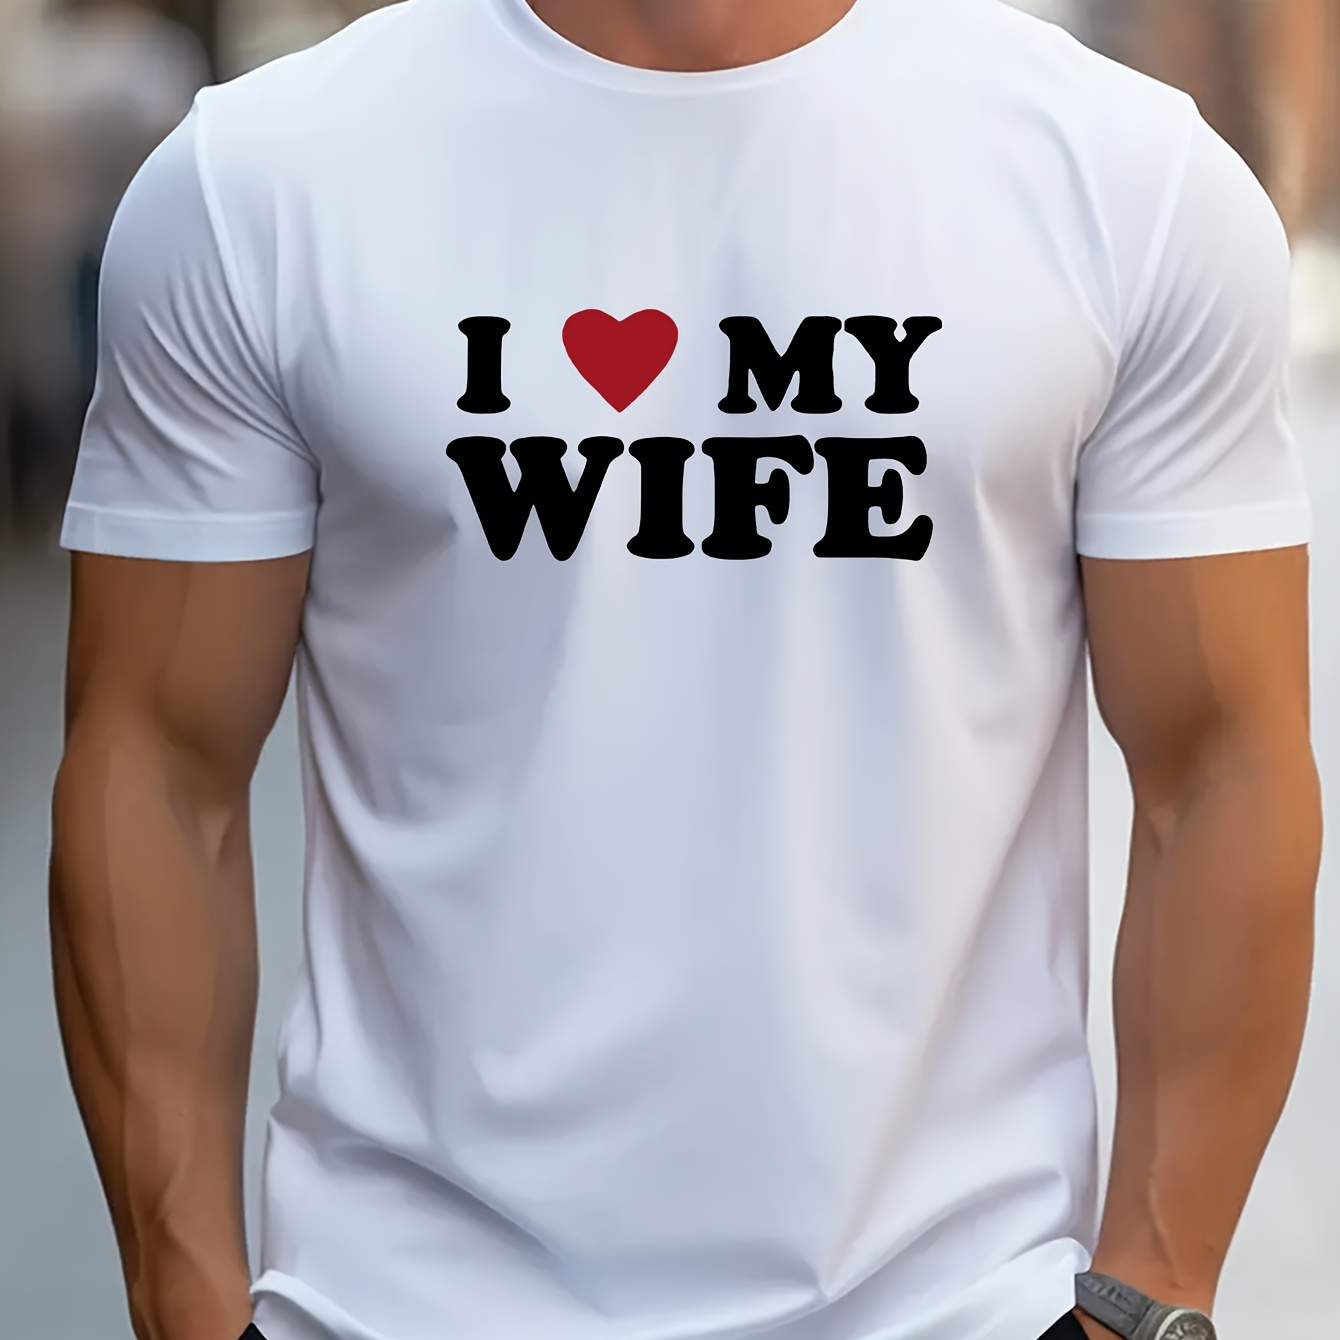 

I Love My Wife Print Tee Shirt, Tees For Men, Casual Short Sleeve T-shirt For Summer